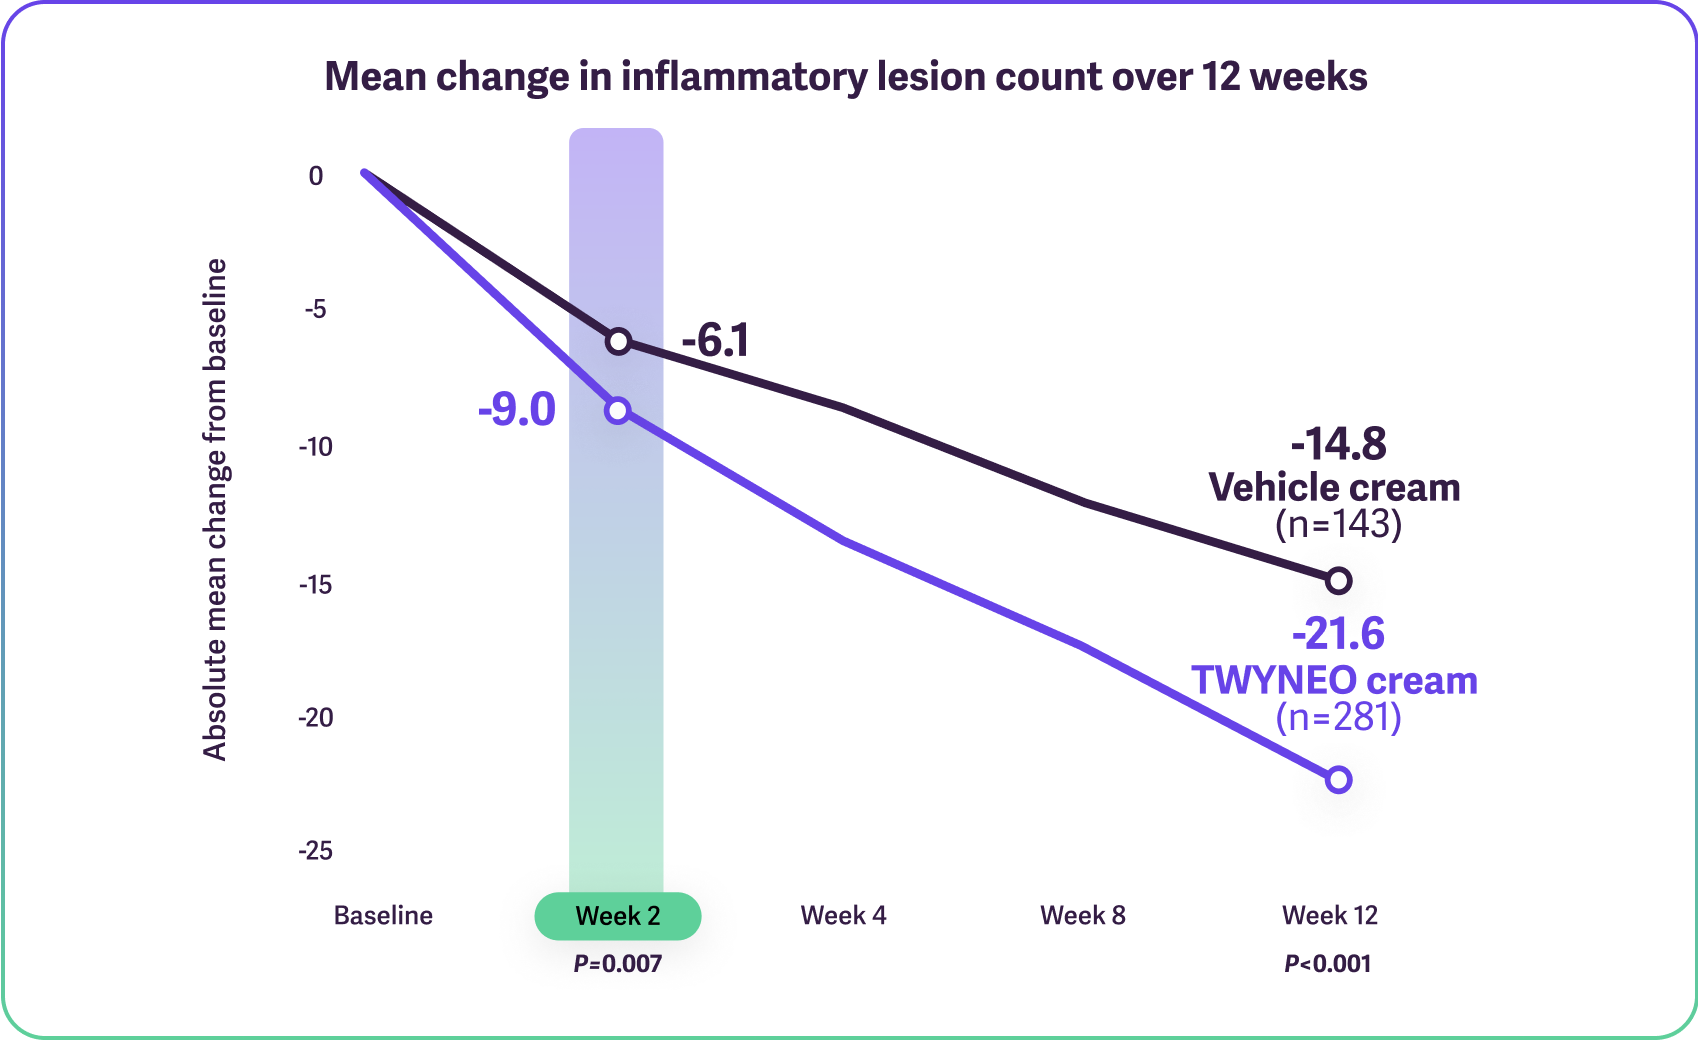 Line graphs showing reduction in inflammatory lesions, highlighting Weeks 2 and 12.